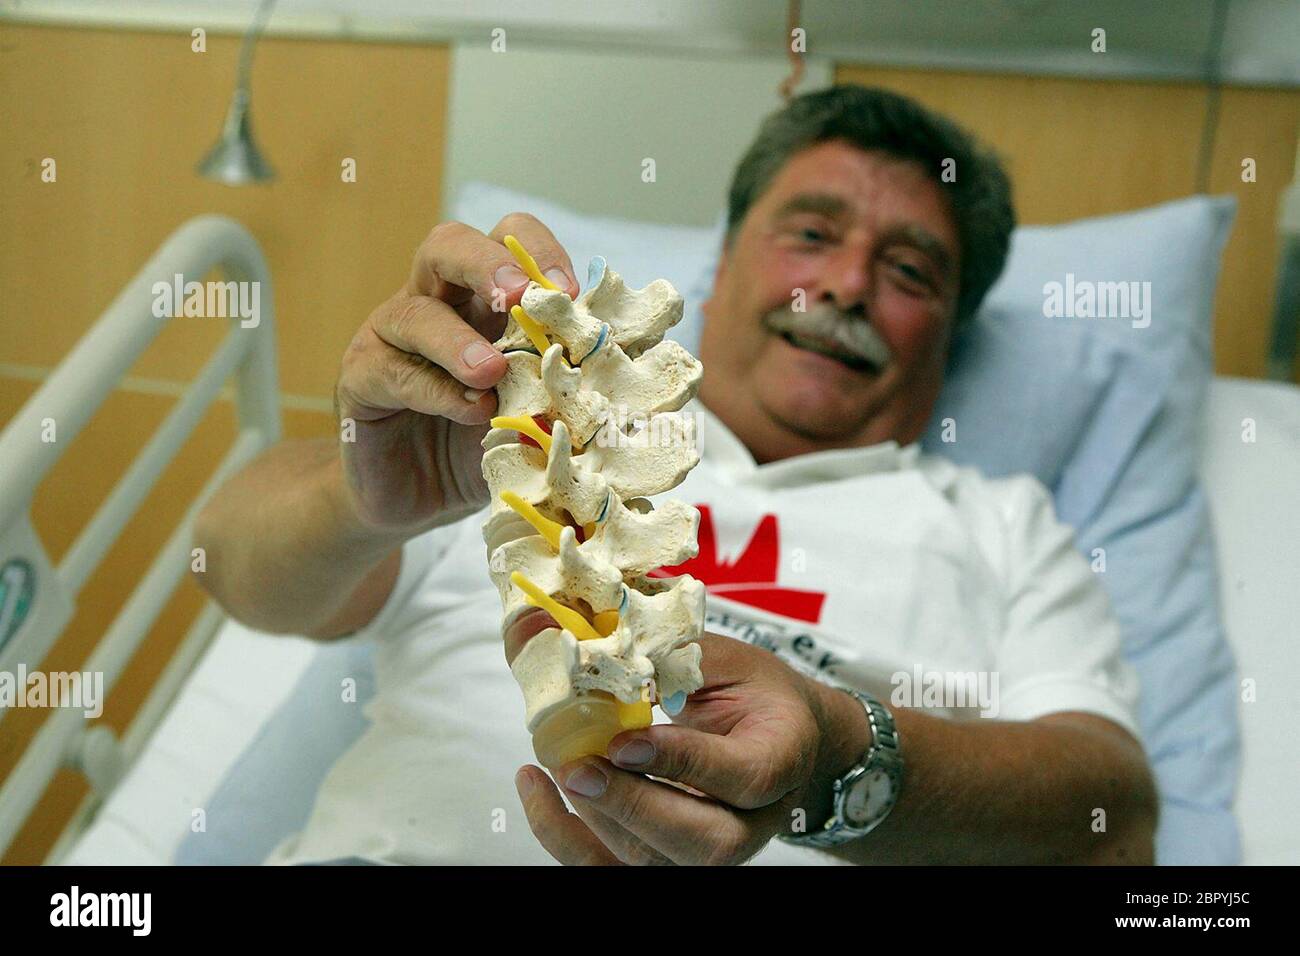 Page 3 - Krankenbett High Resolution Stock Photography and Images - Alamy